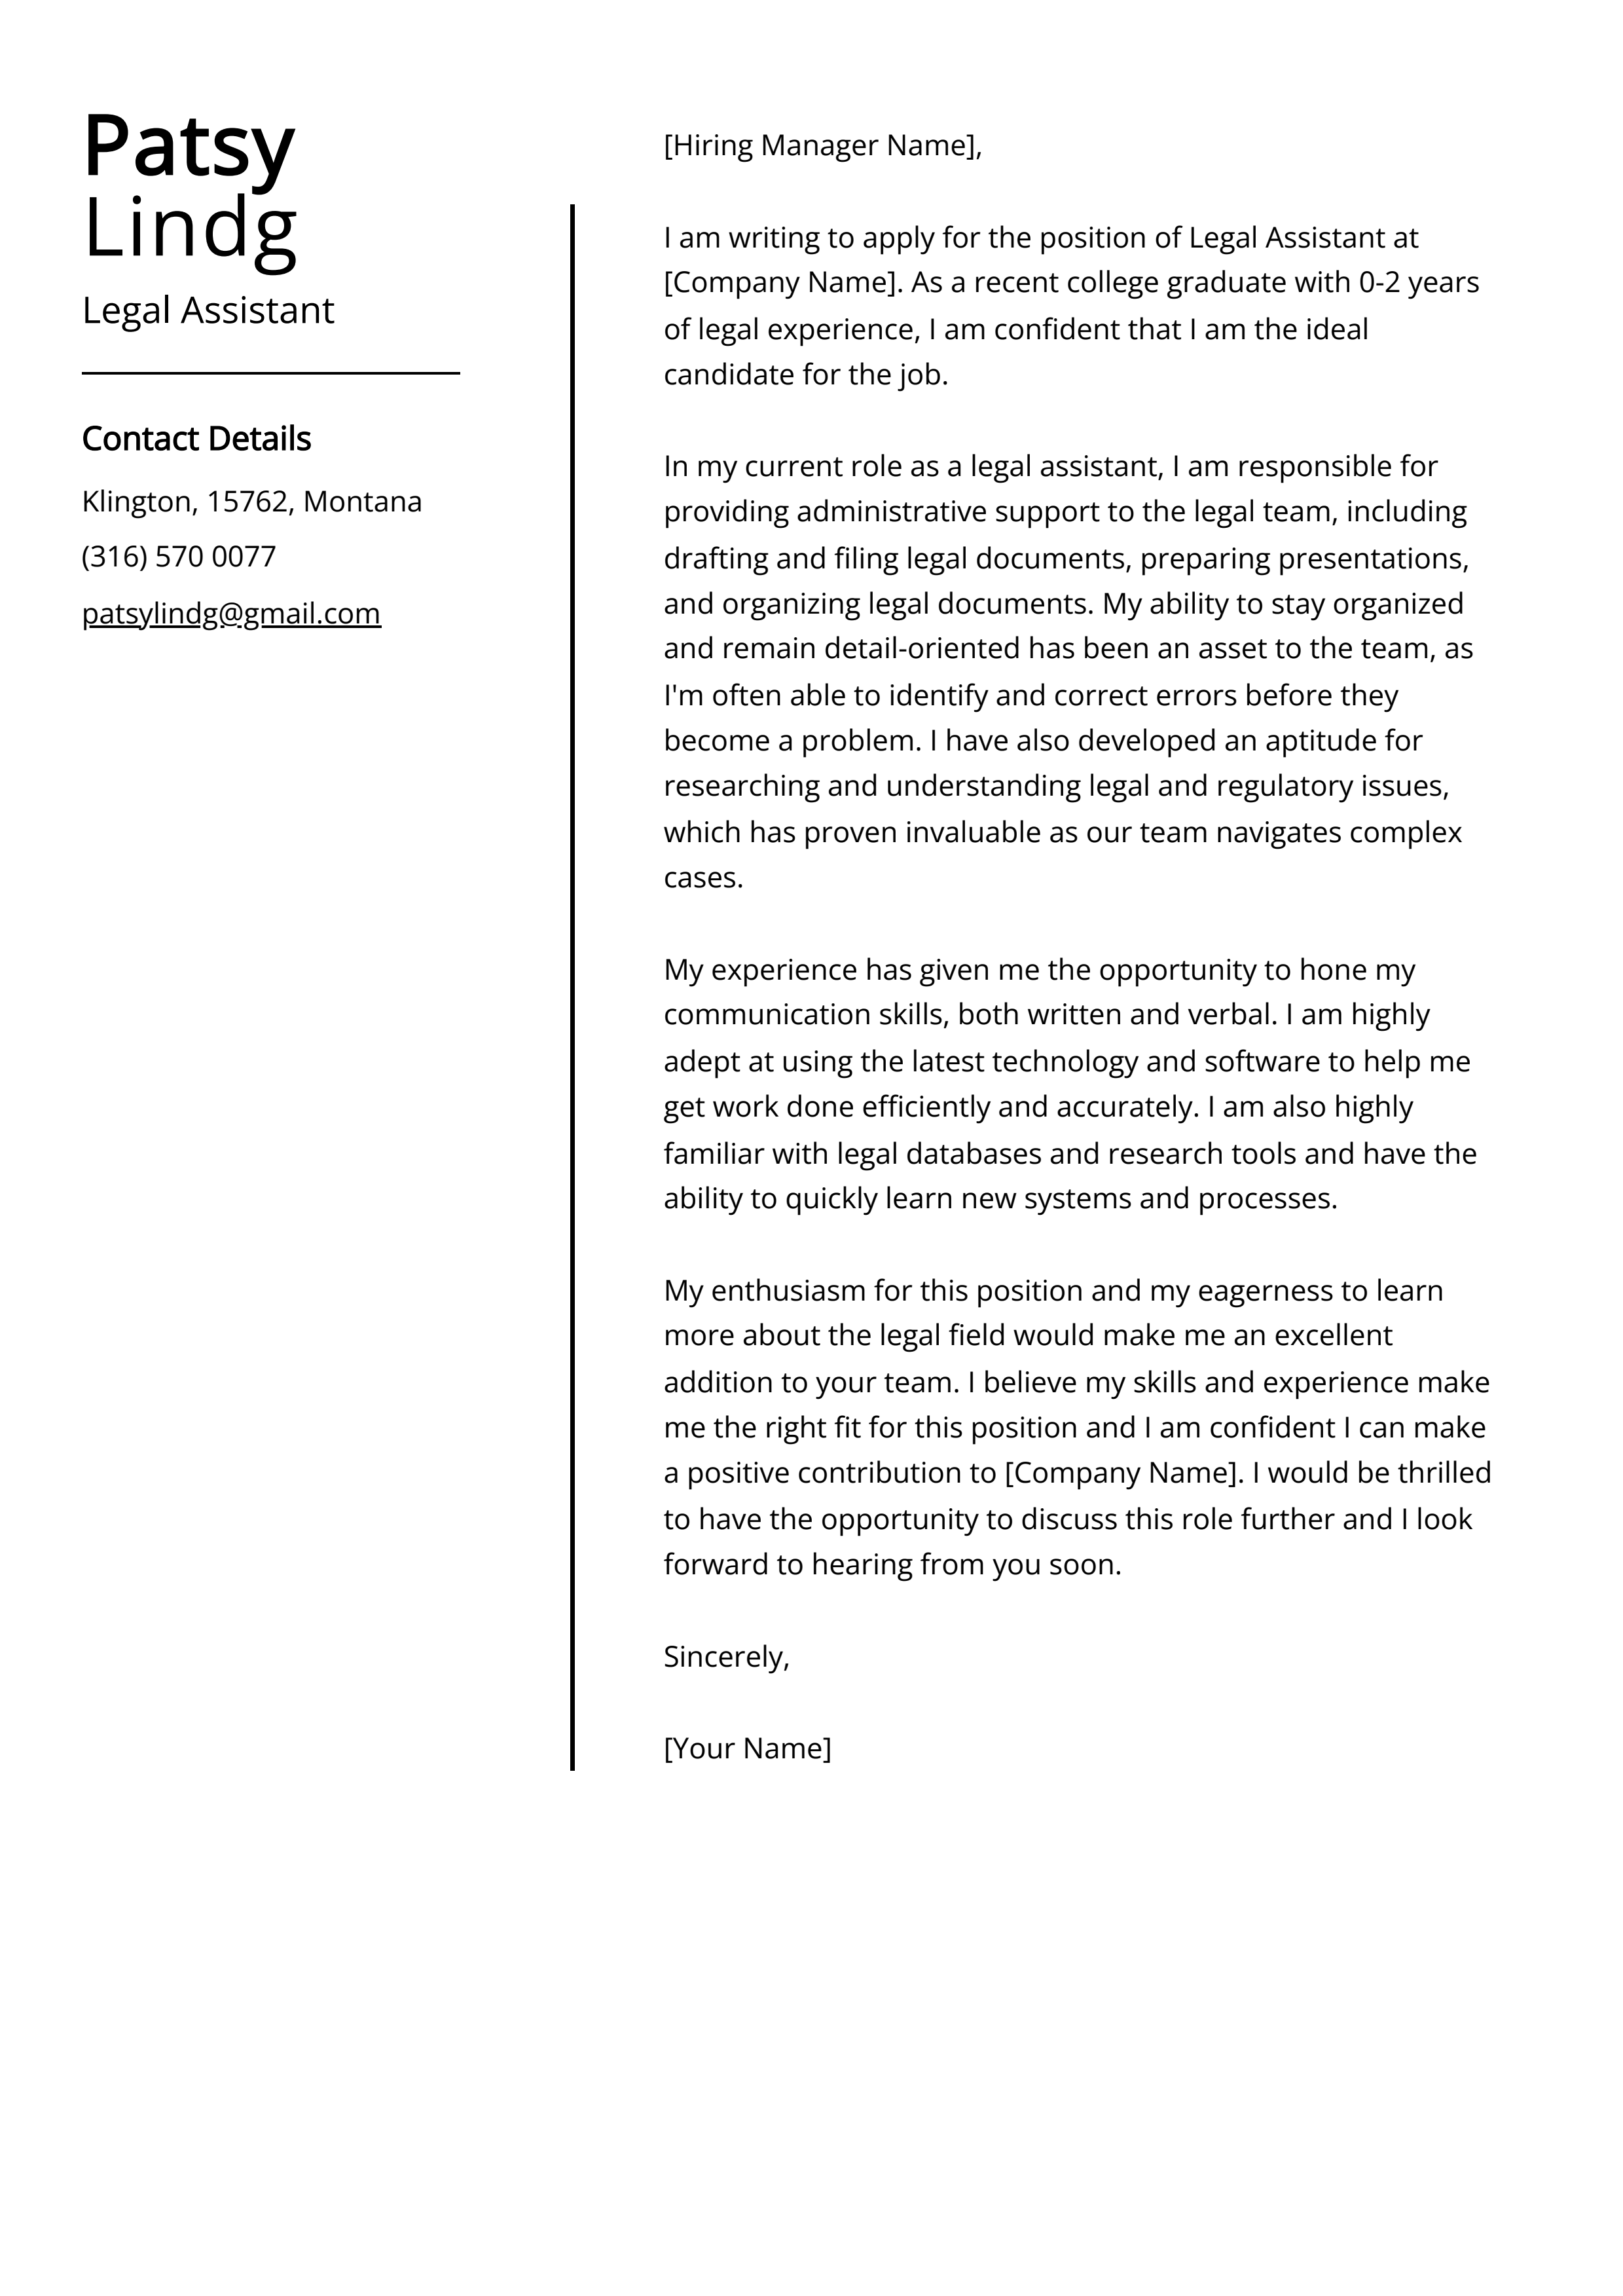 Legal Assistant Cover Letter Example